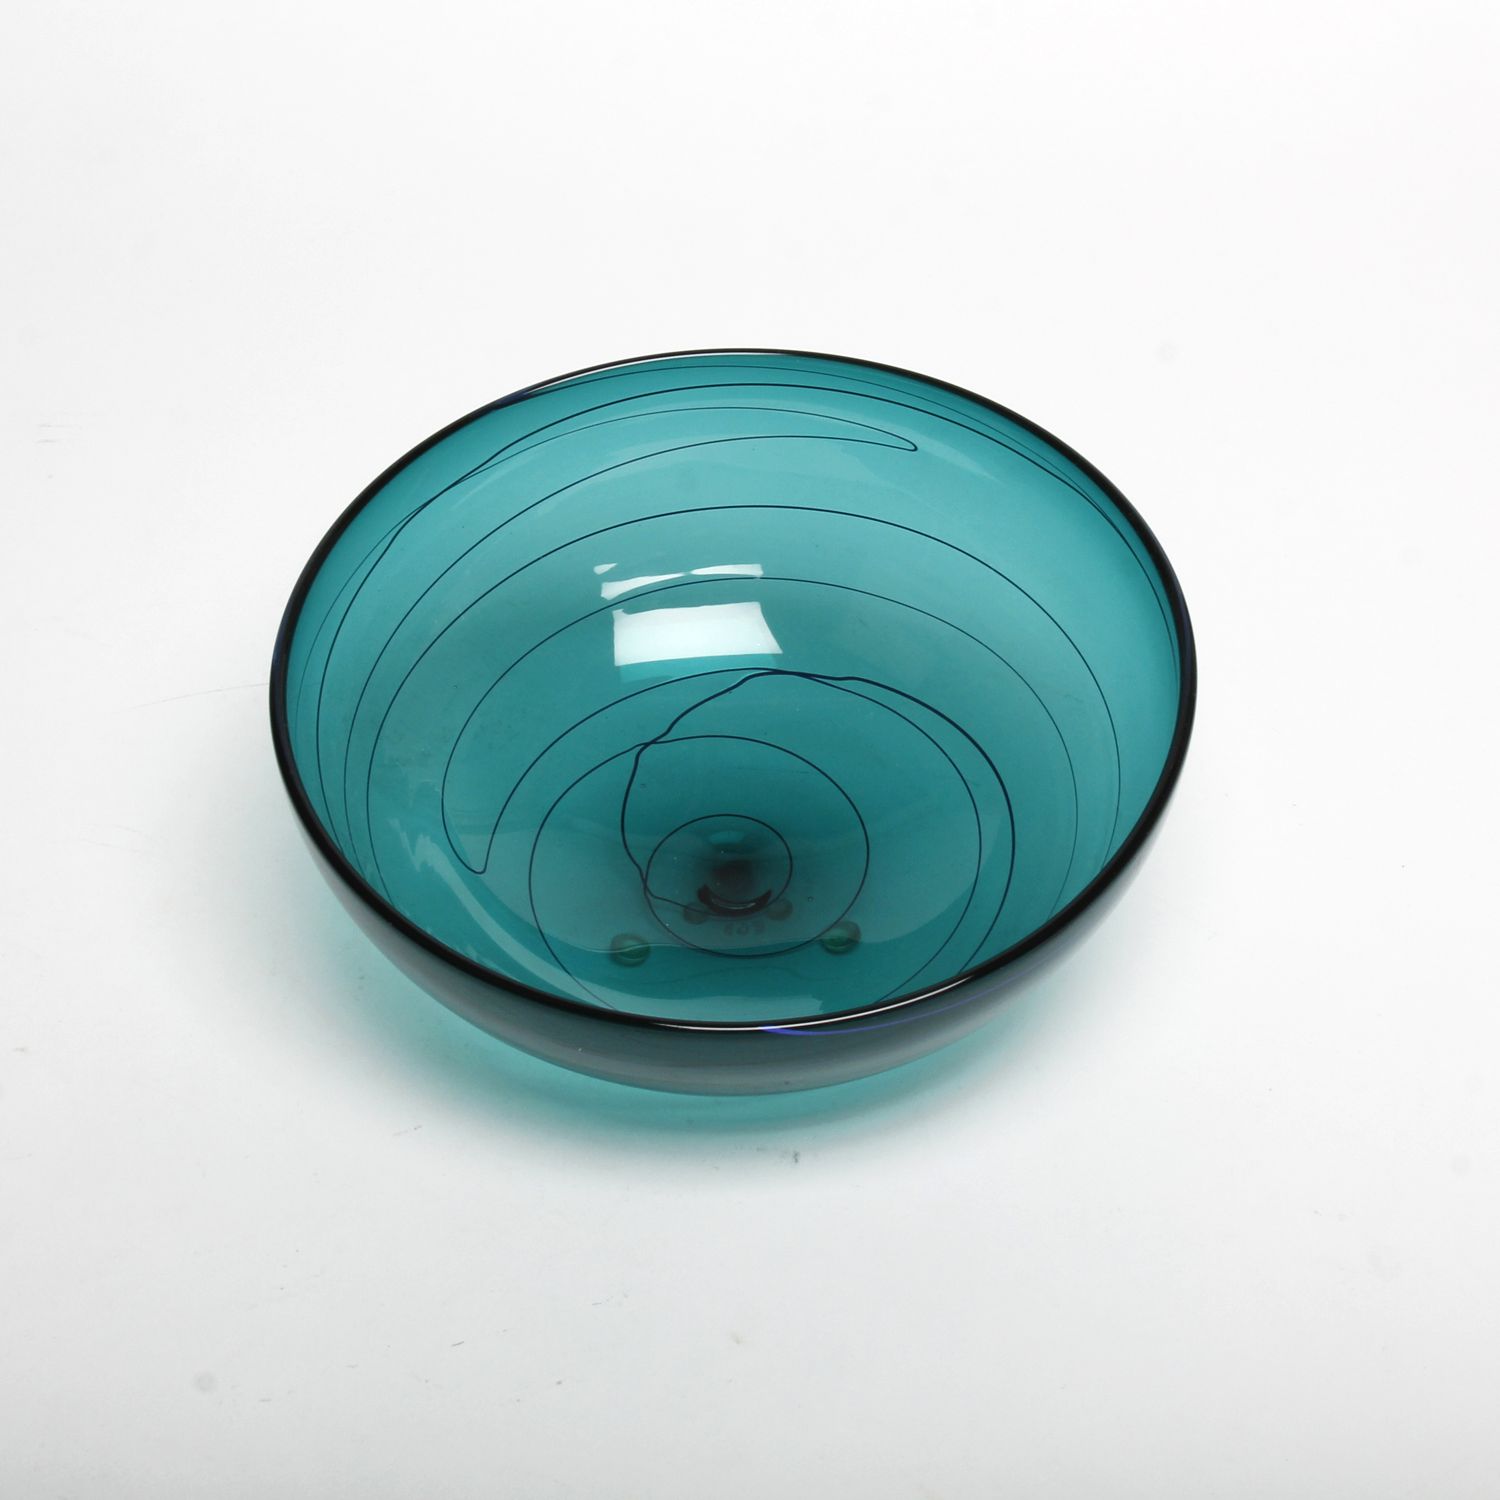 Eidos Glass Designs: Bowl (Each sold separately) Product Image 3 of 5